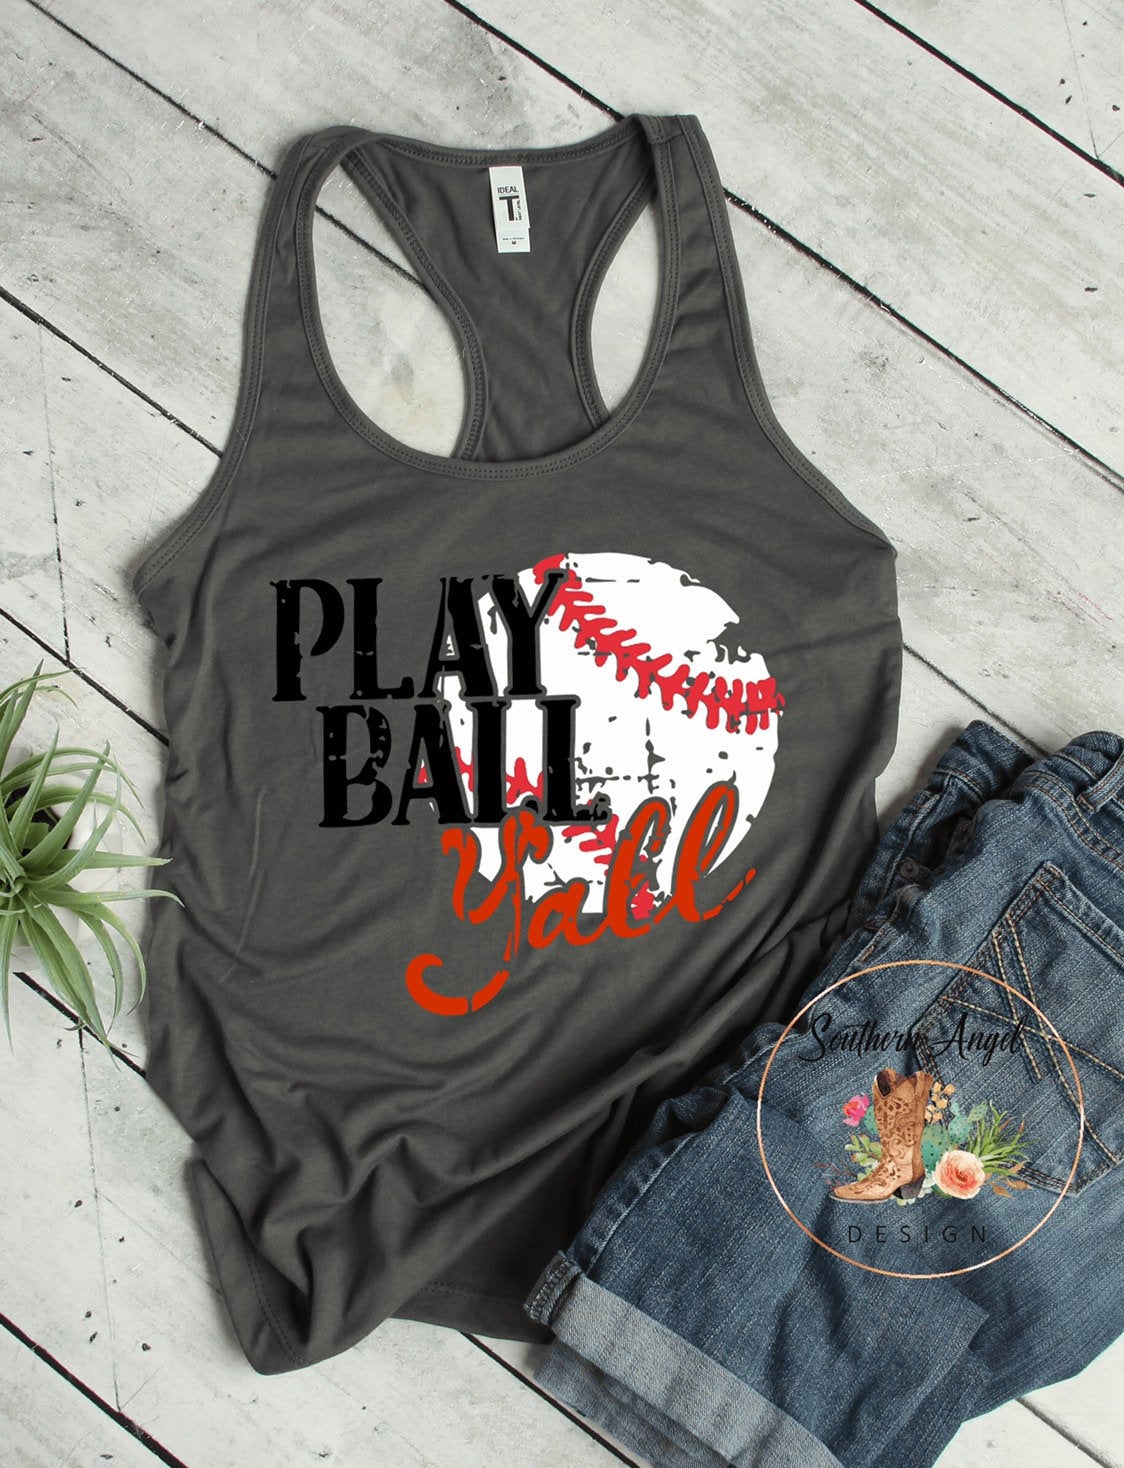 Play Ball Y'all - Southern Angel Design